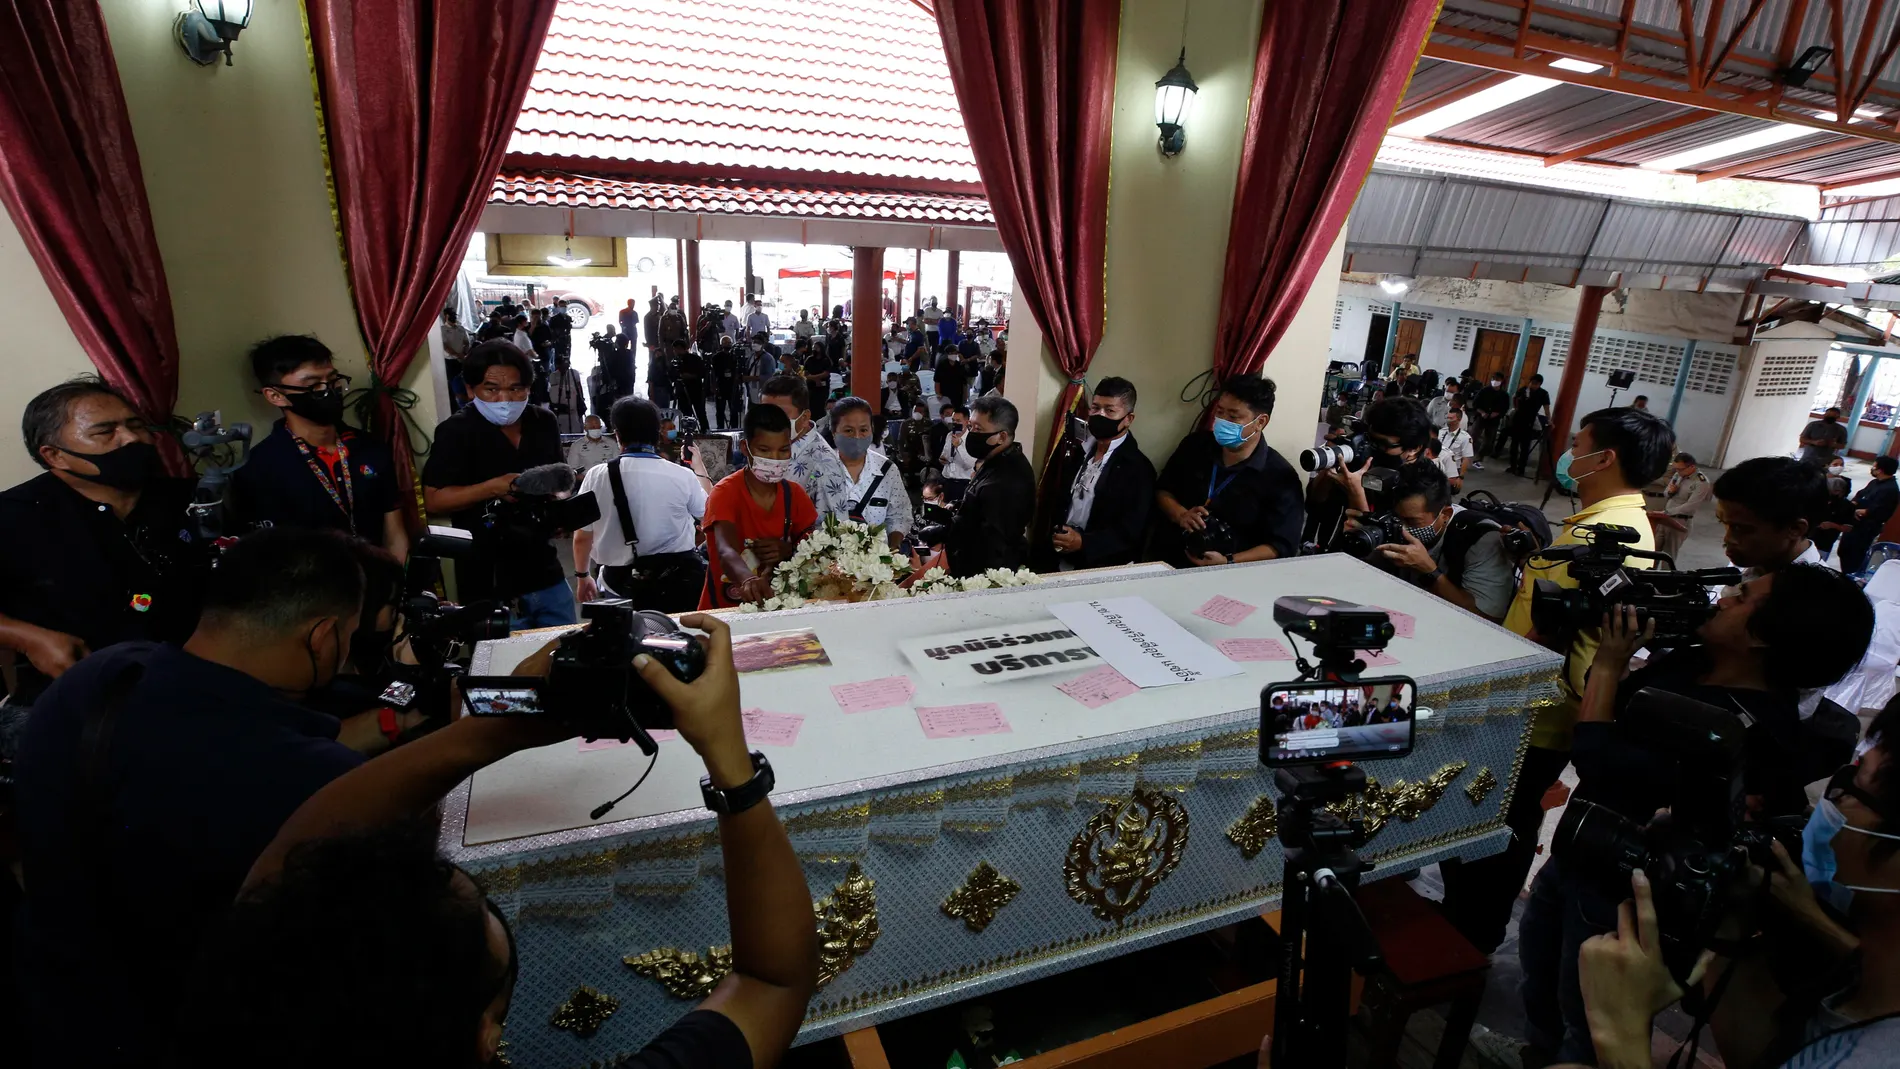 Nonthaburi (Thailand), 23/07/2020.- People gather around a coffin during the ceremony for the cremation of late Thai serial killer Si Quey, at Wat Bang Phraek Tai temple in Nonthaburi province, Thailand, 23 July 2020. The cremation was held after 60 years from his execution. The body had been taken for medical studies and preserved in a glass case at the Medical Museum of Siriraj Hospital. Si Quey was arrested in 1958 and convicted for murdering and eating seven children. He was executed in 1959 at Bang Kwang prison. (Tailandia) EFE/EPA/NARONG SANGNAK